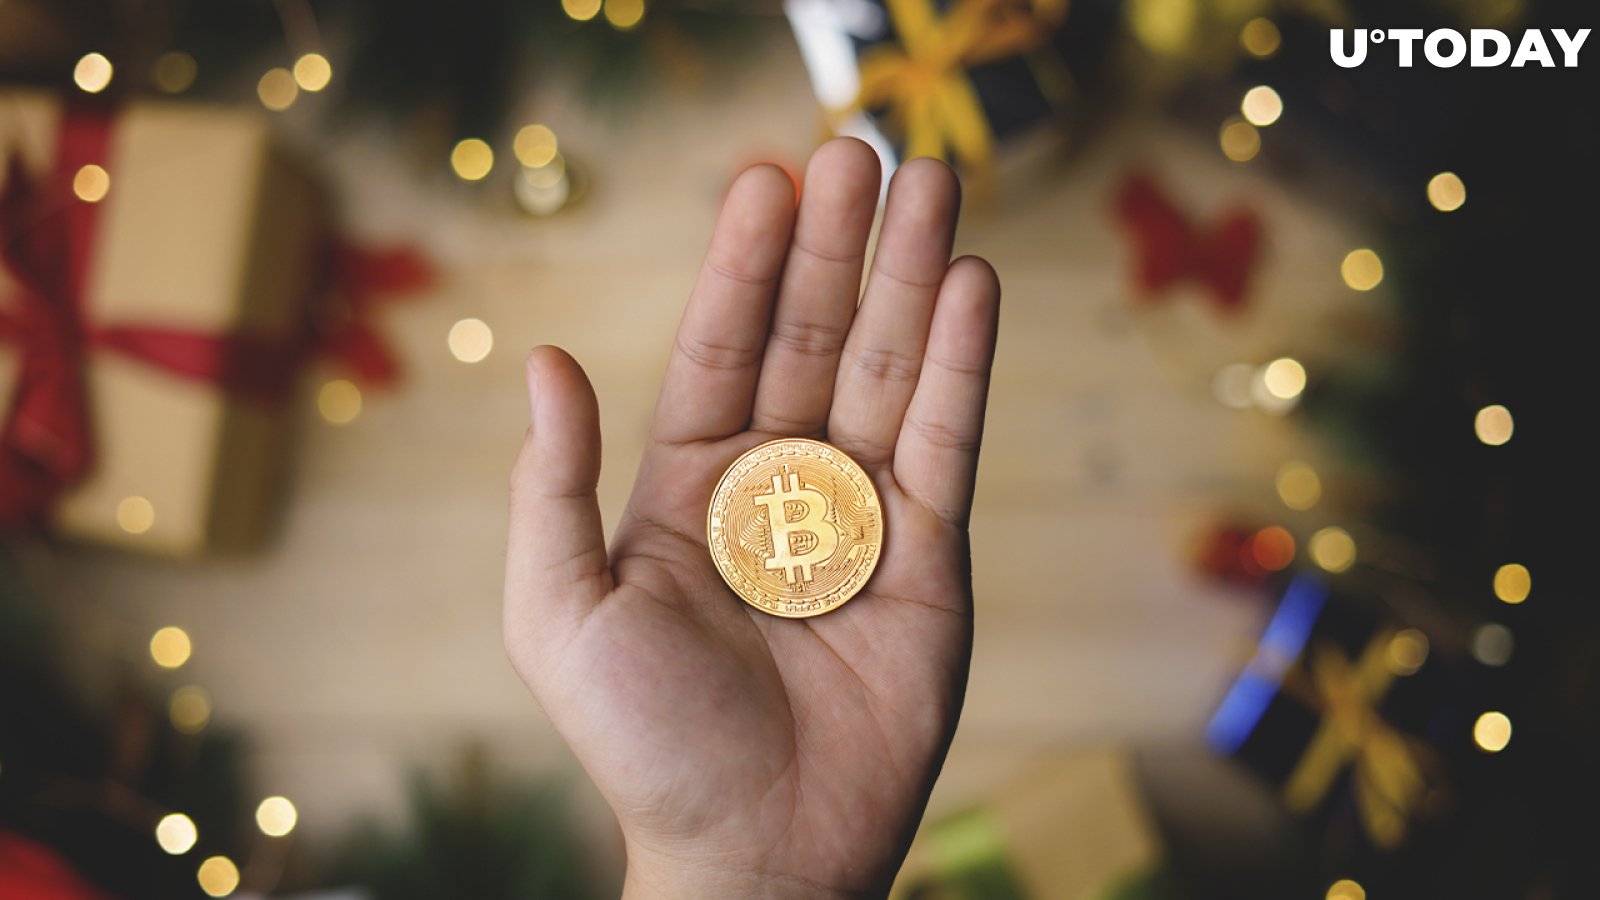 Bitcoin for $24,000, Ethereum for $600: Here's How Much Cryptocurrencies Have Gained Since Christmas 2020